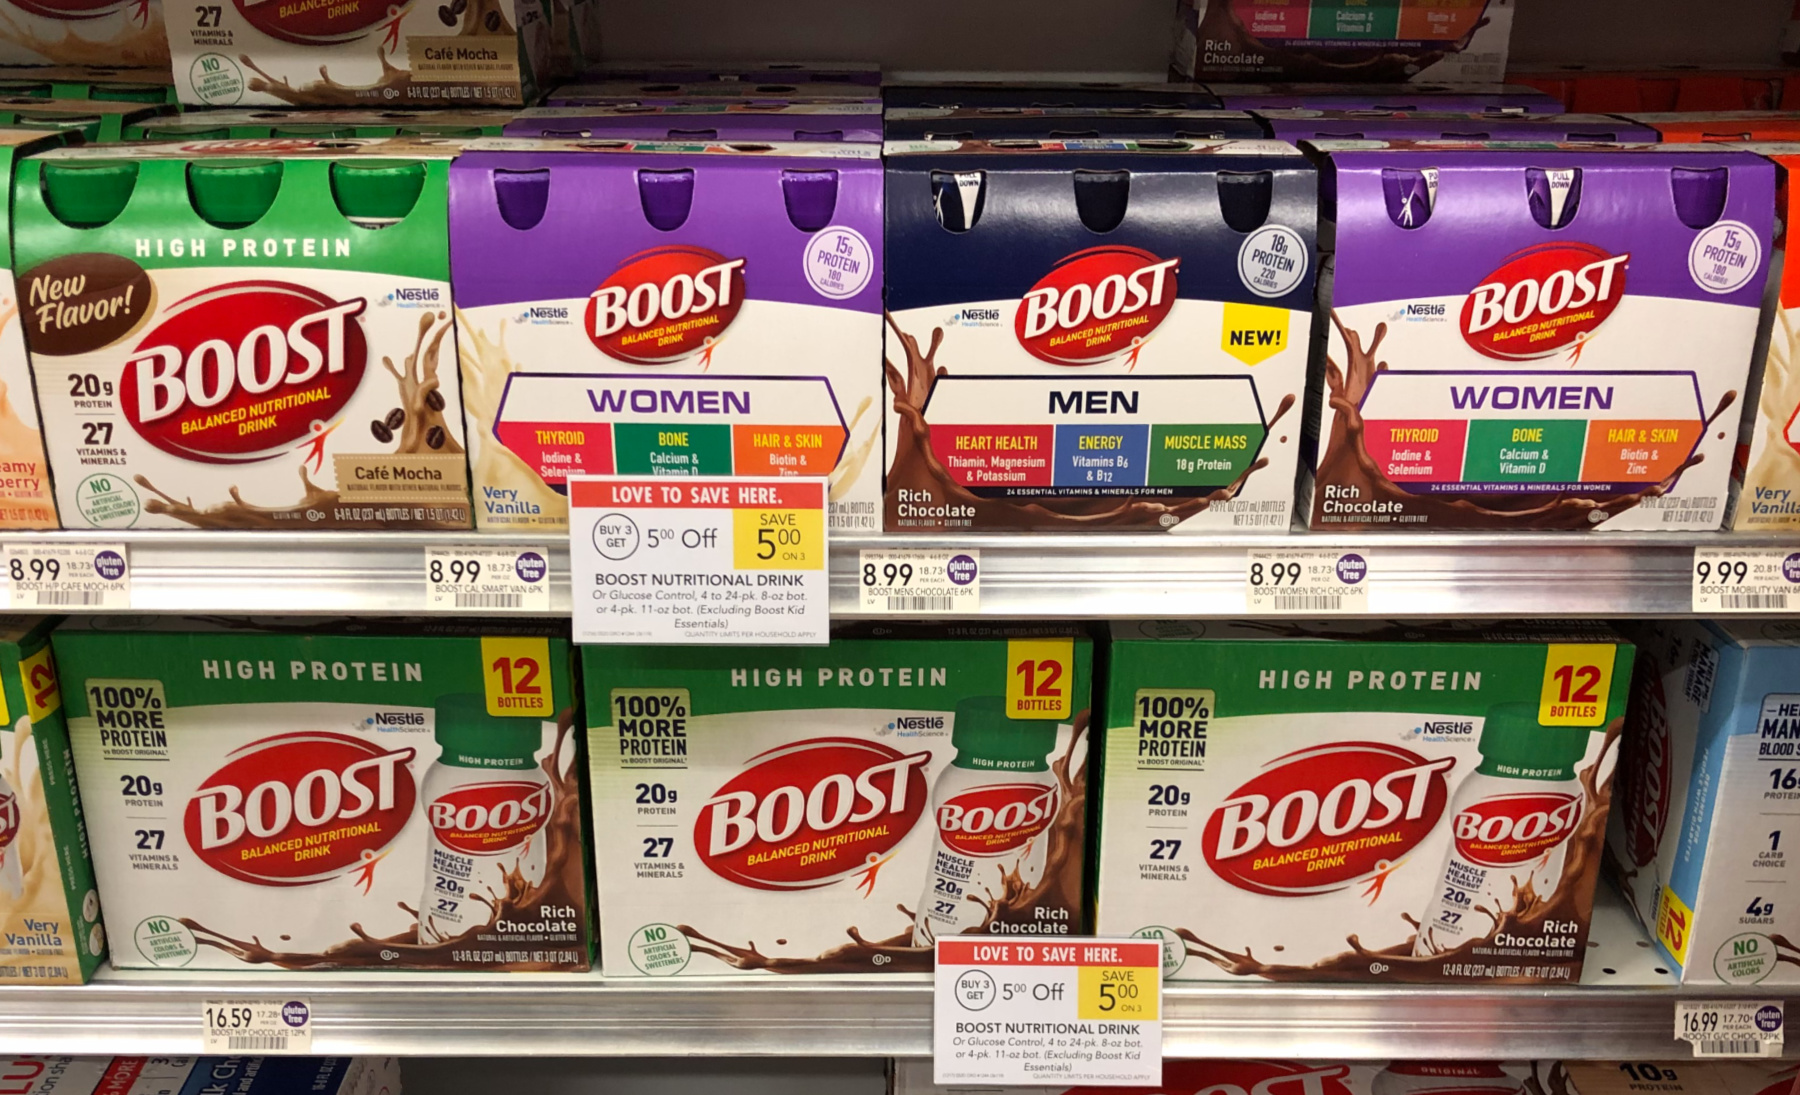 Smart Snacking At A Great Price - BOOST® Nutritional Drinks Are On Sale NOW At Publix on I Heart Publix